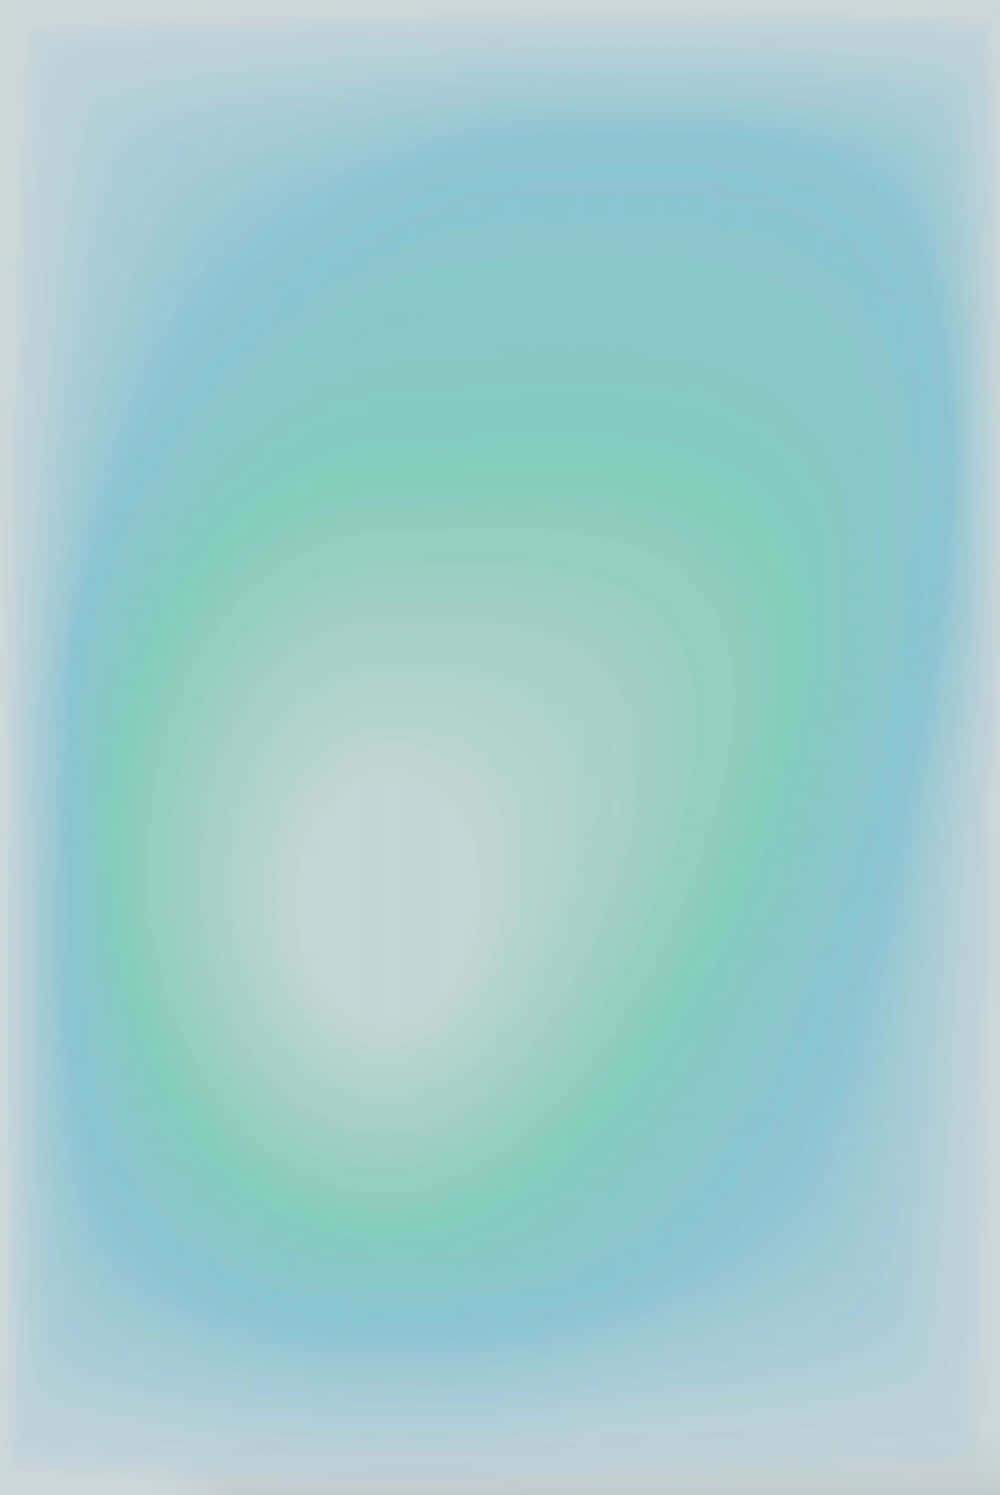 A Blue And Green Abstract Painting On White Background